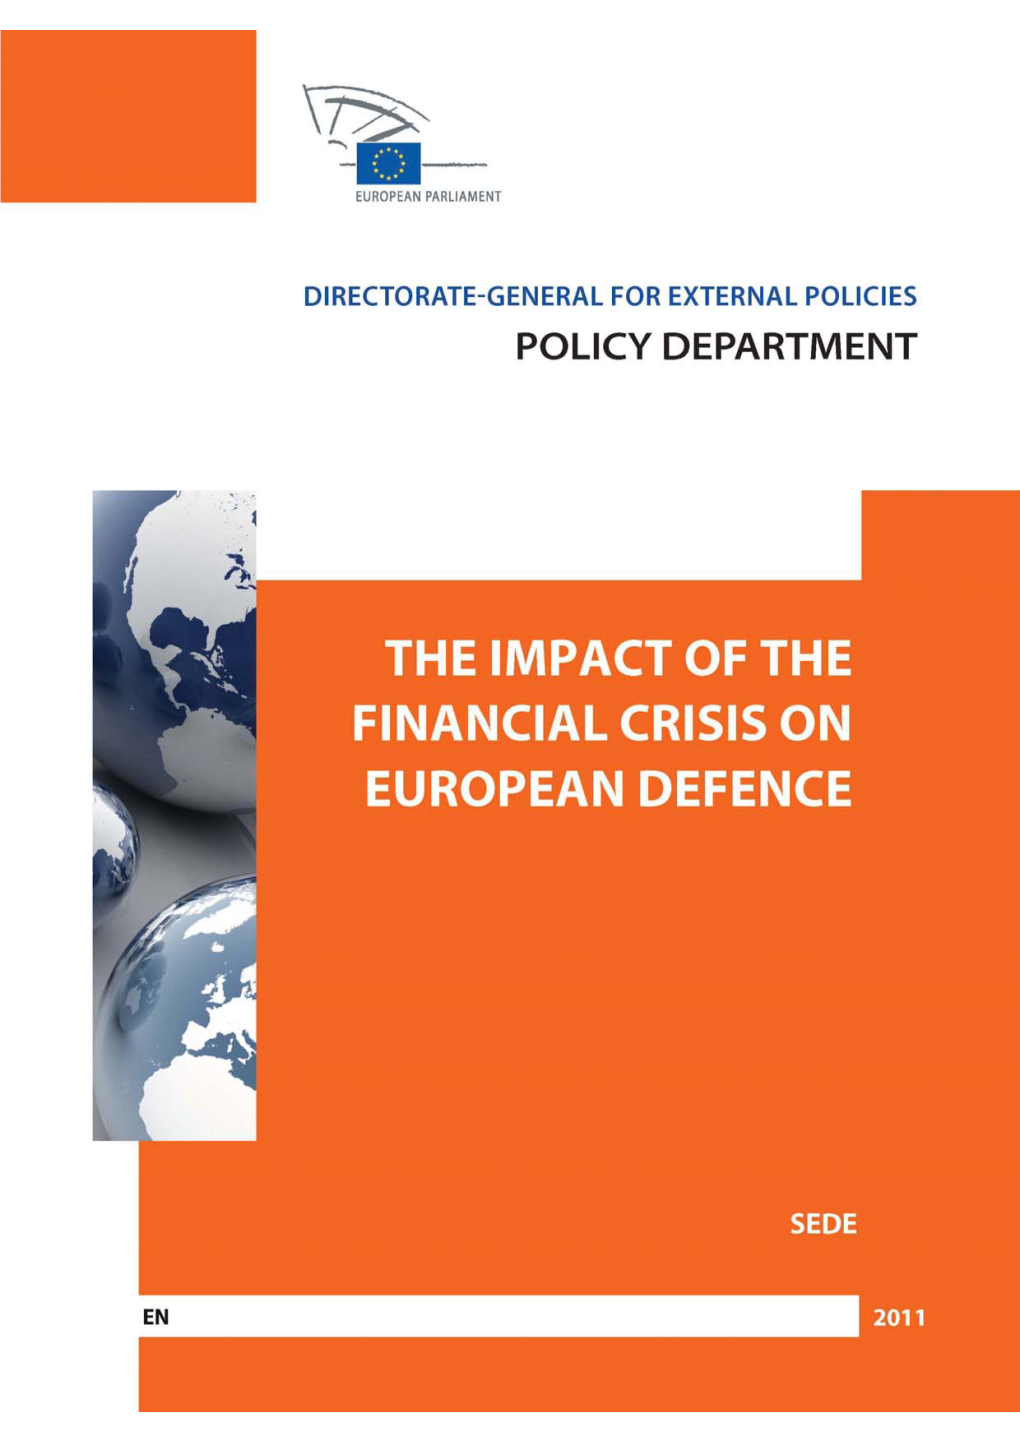 The Impact of the Financial Crisis on European Defence